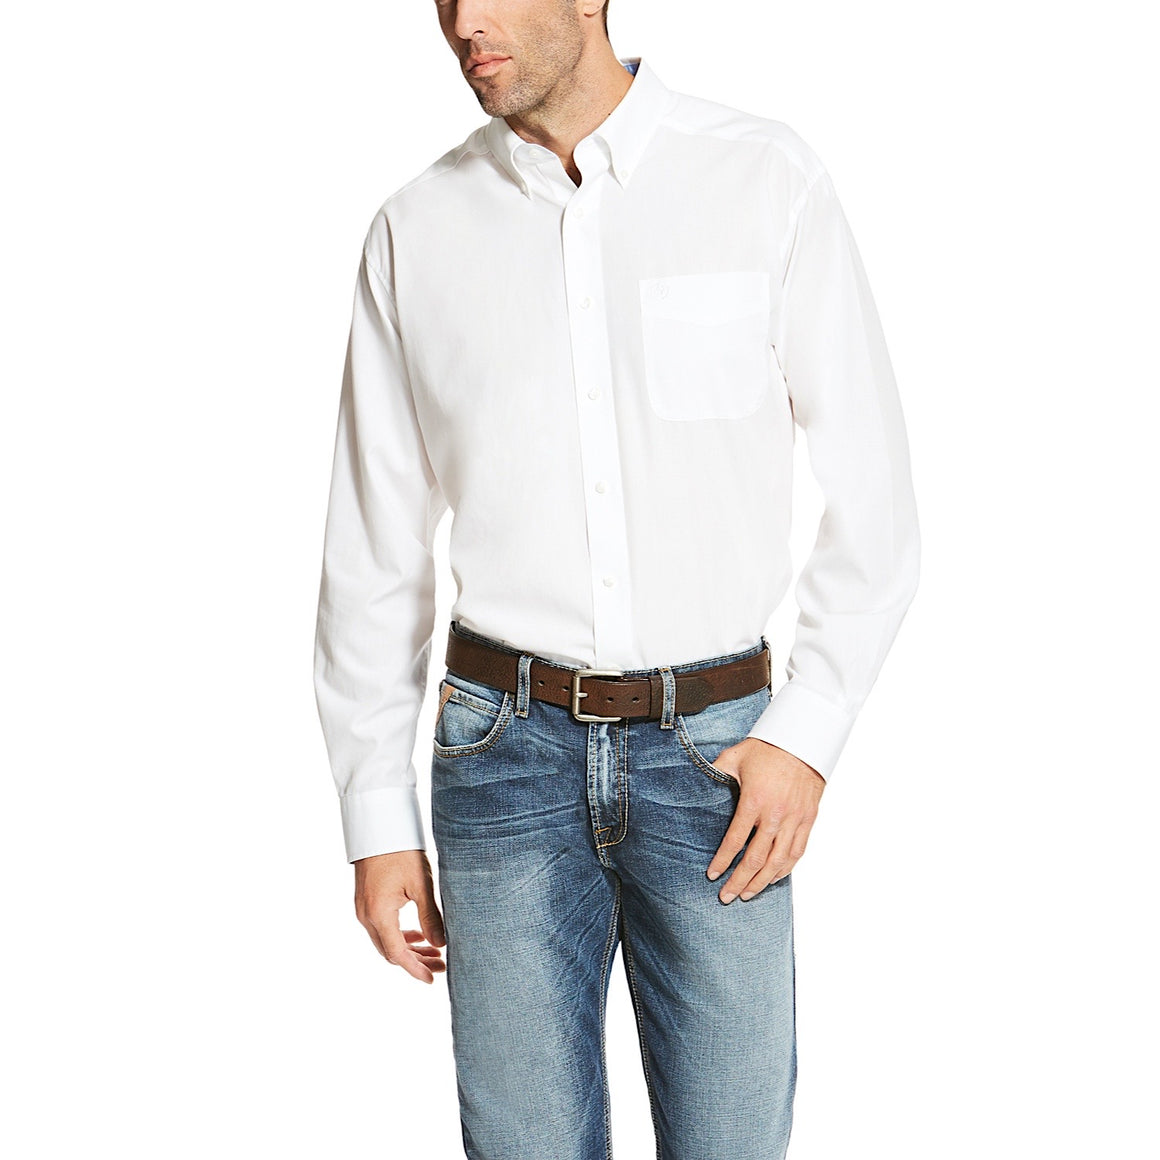 Ariat Mens Wrinkle Free Solid Classic Fit Shirt White